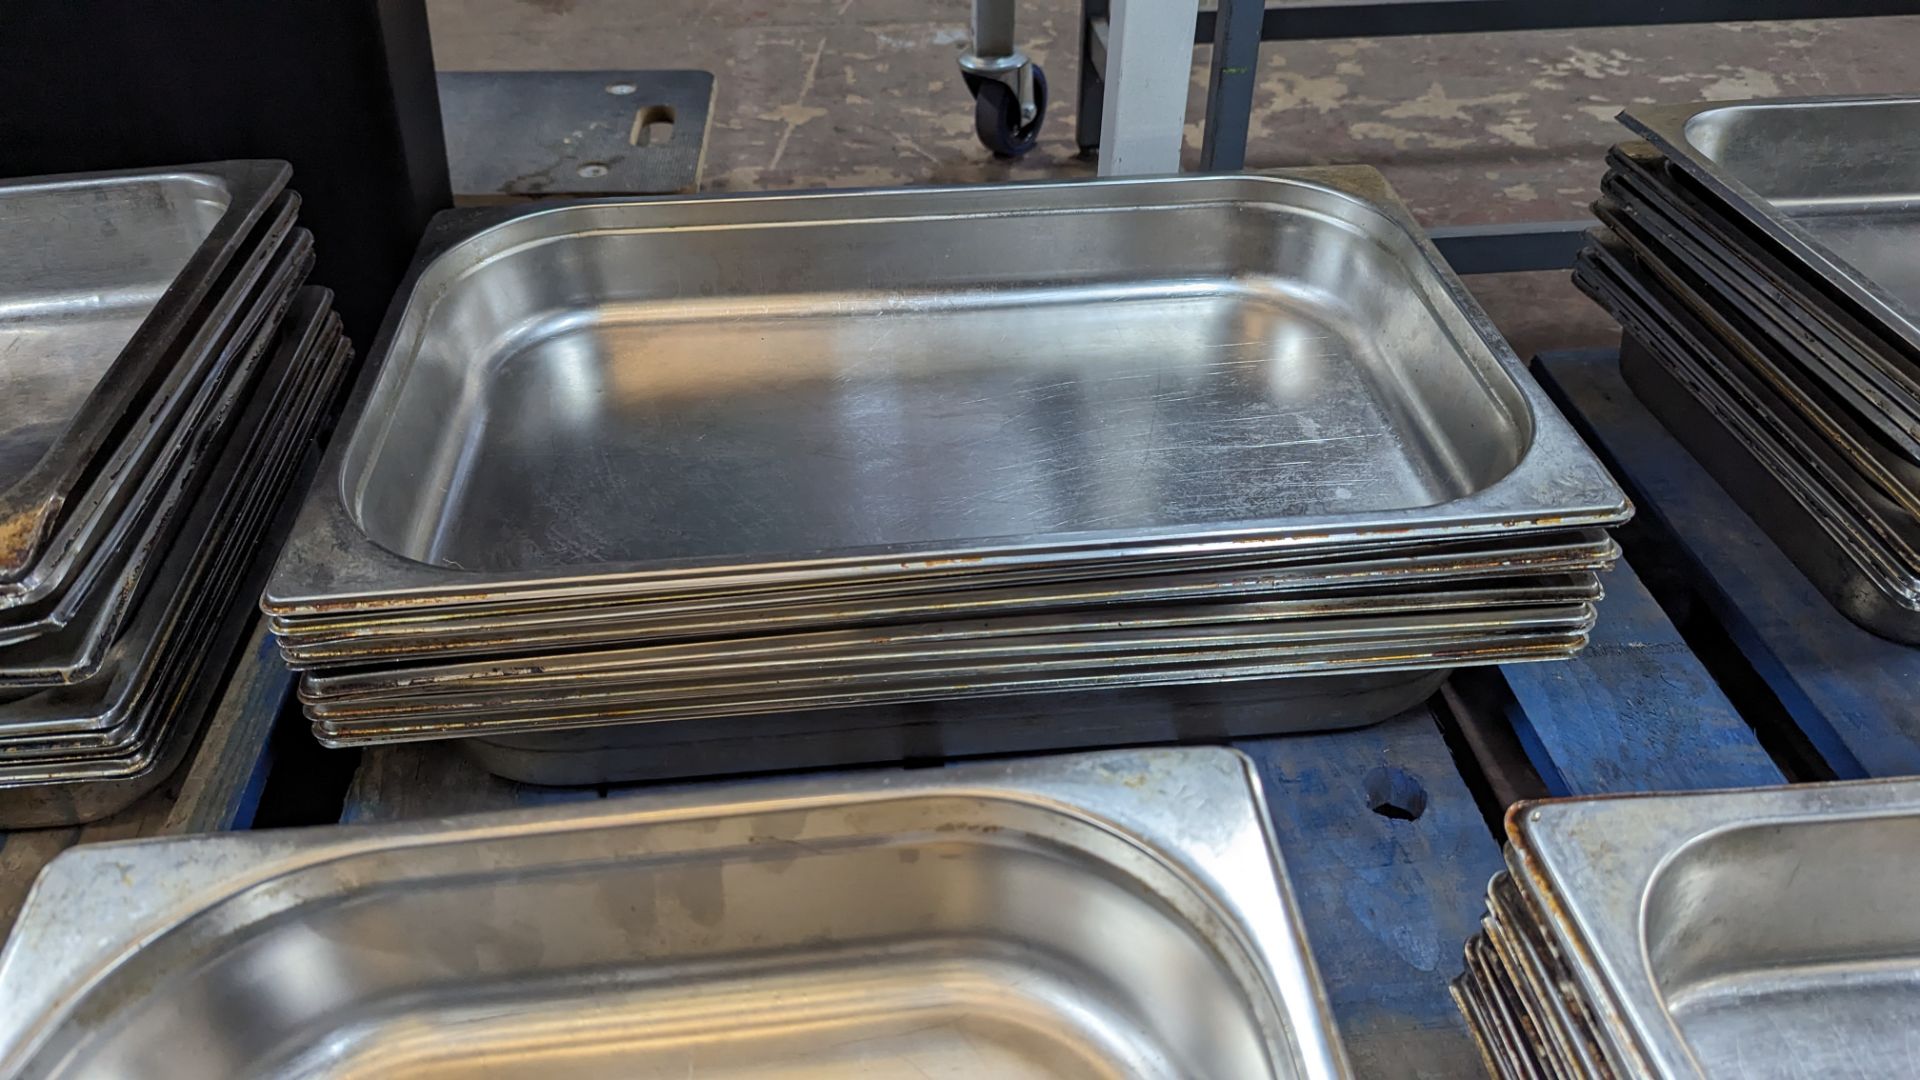 10 off stainless steel trays each measuring 530mm x 330mm x 70mm - Image 2 of 3